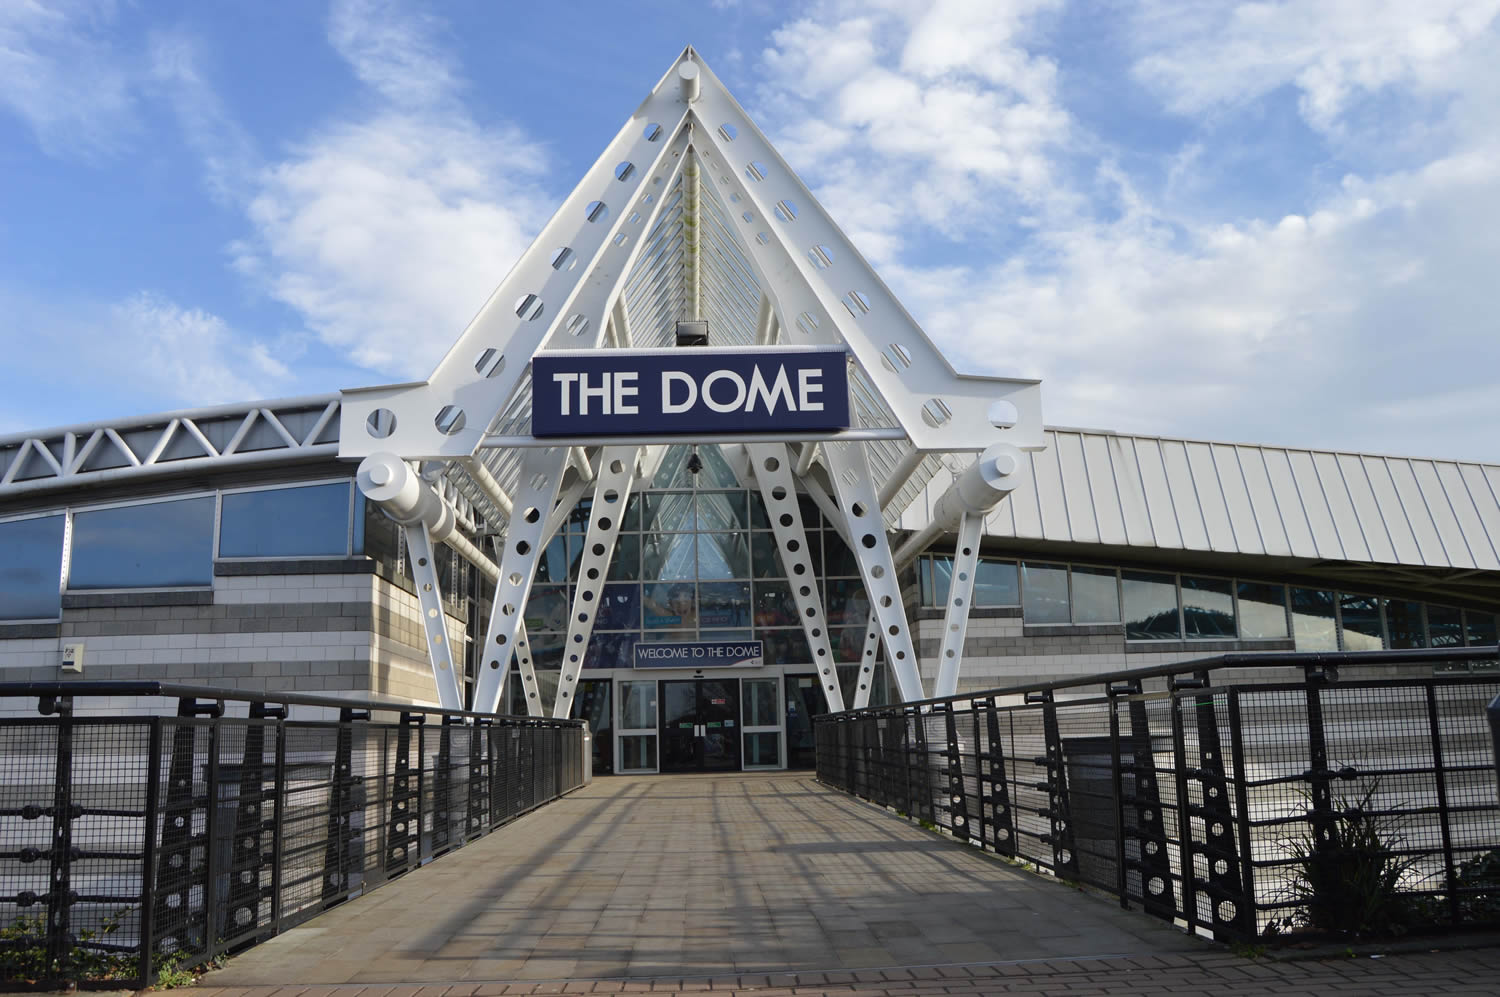 Image name Doncaster Dome the 1 image from the post Visitor Attractions in Yorkshire.com.